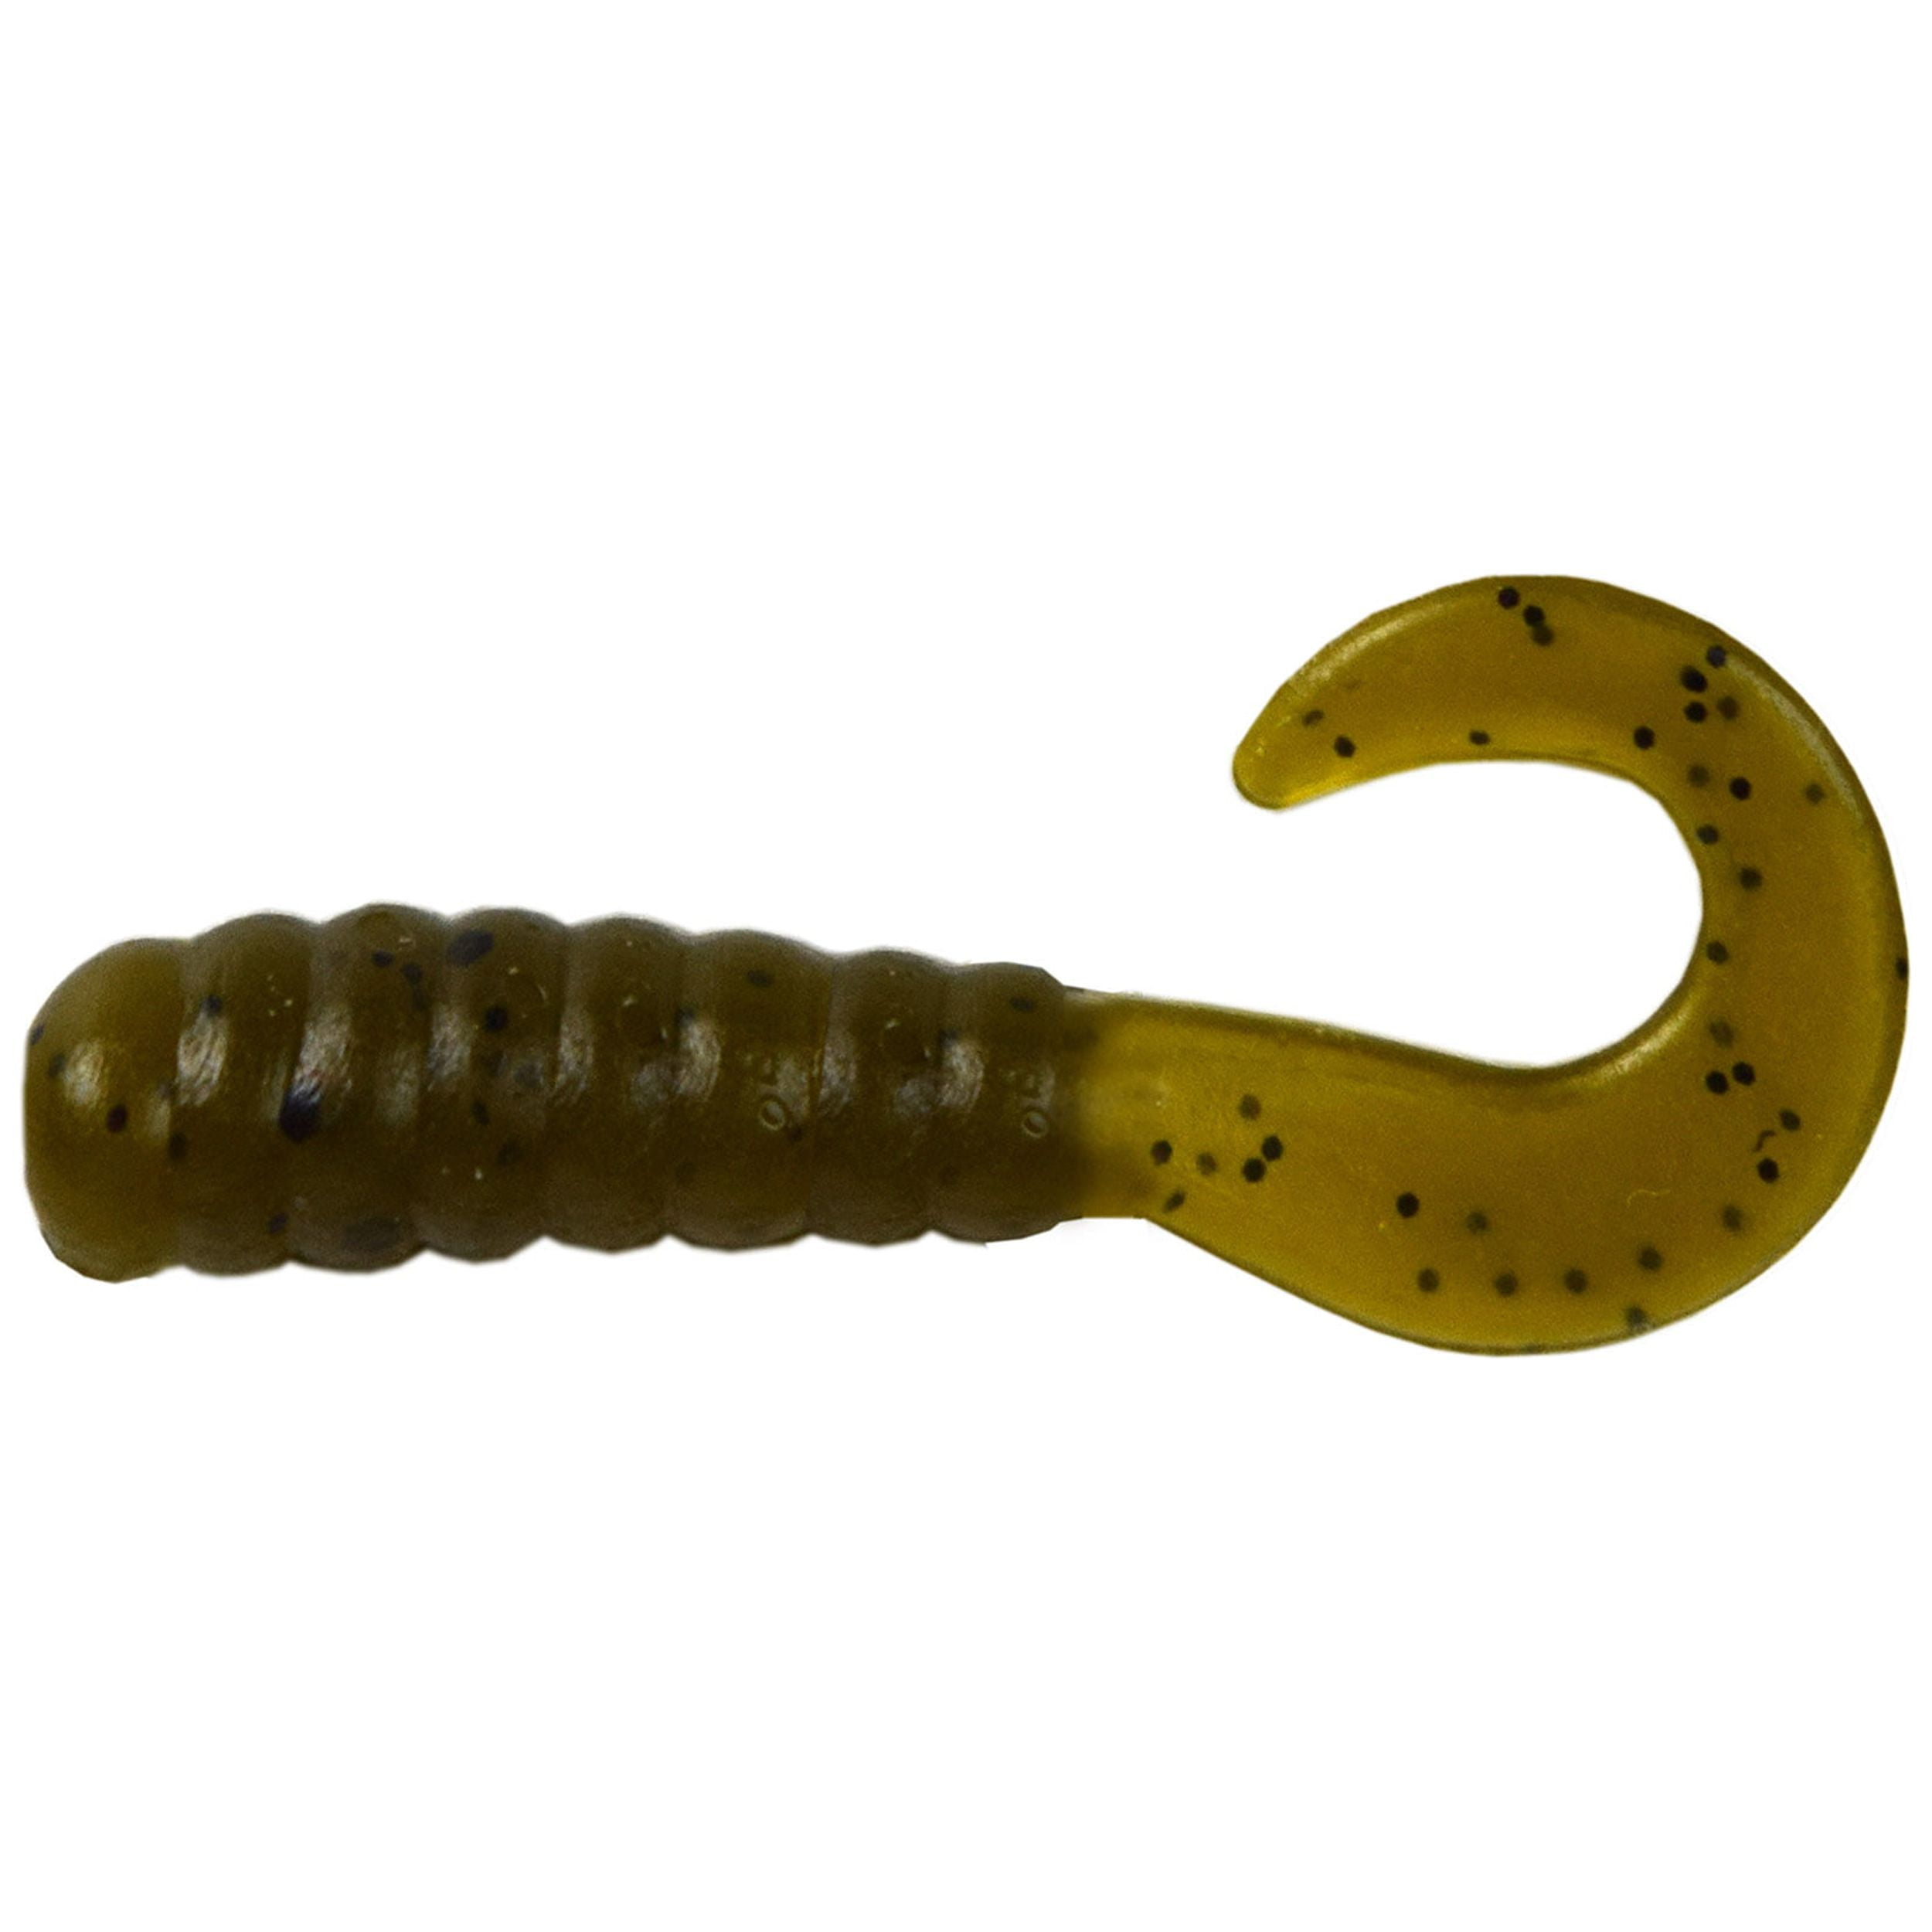 Tackle HD 100-Pack Grub Fishing Lures, 2-Inch Skirted Grub with Curly Tail,  Bulk Fishing Grubs for Crappie, Bass, Walleye, or Trout Bait, Freshwater or  Saltwater Swimbait, Monkey Milk 